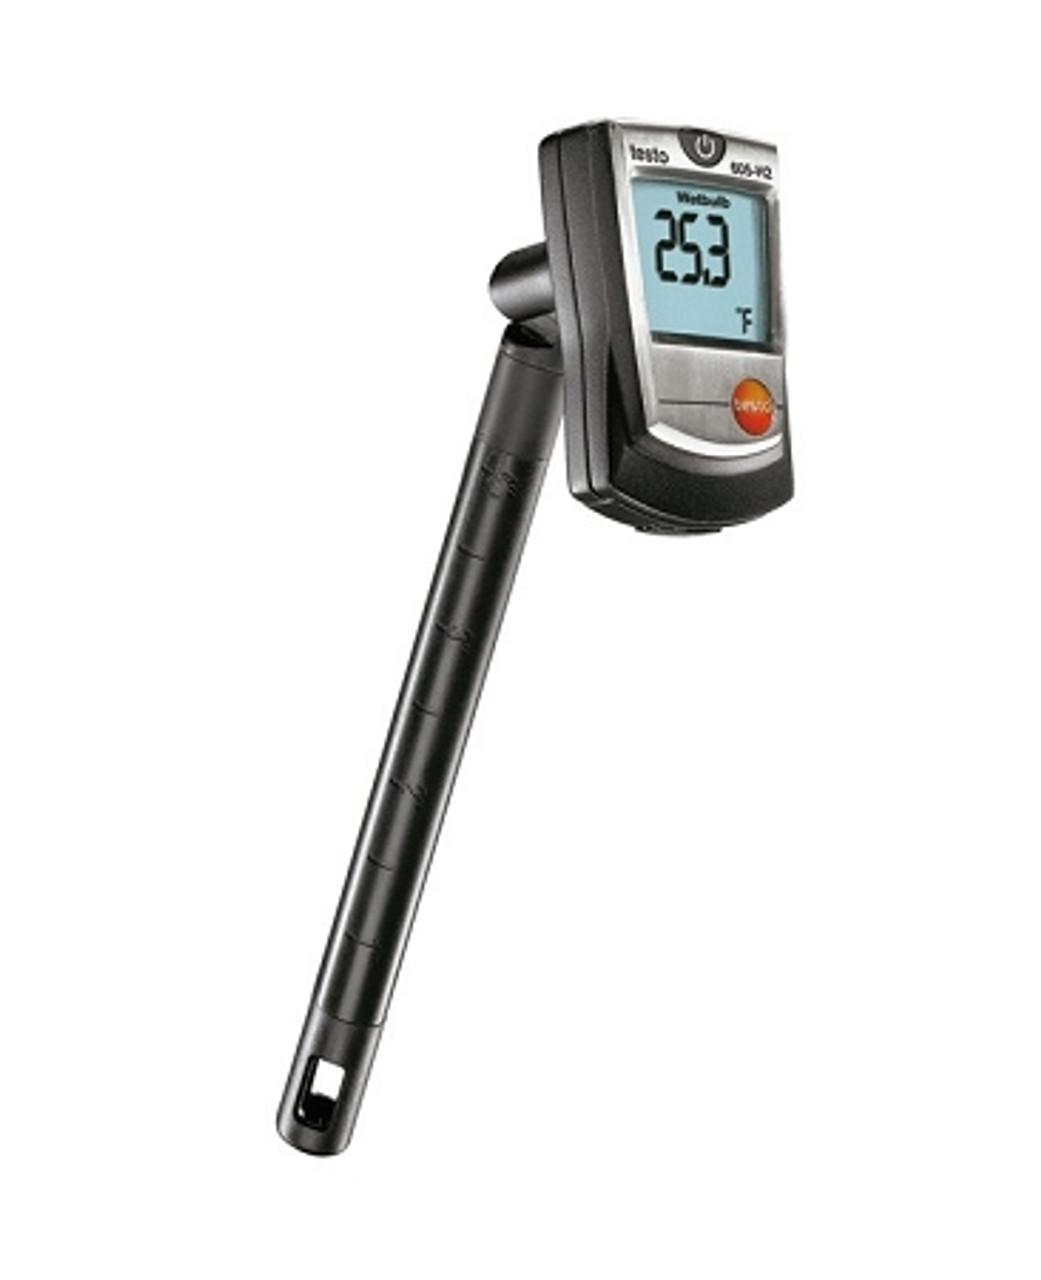 Testo 0560 2605 03 605I Thermo-Hygrometer with Bendable Probe